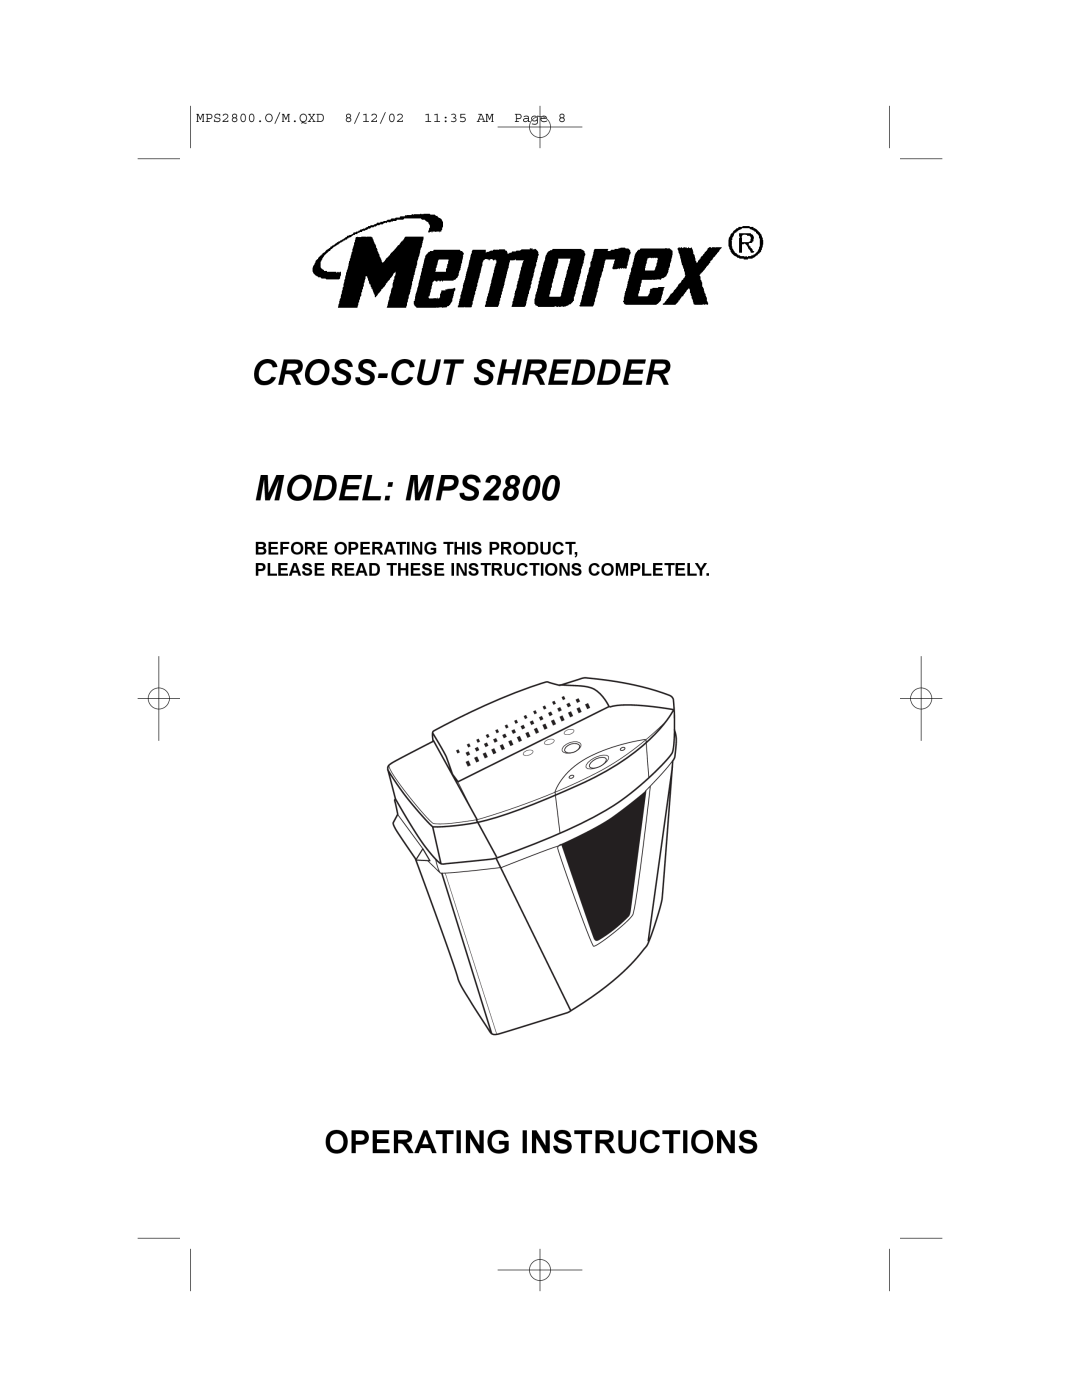 Memorex manual CROSS-CUT SHREDDER MODEL MPS2800, Operating Instructions, Before Operating This Product 